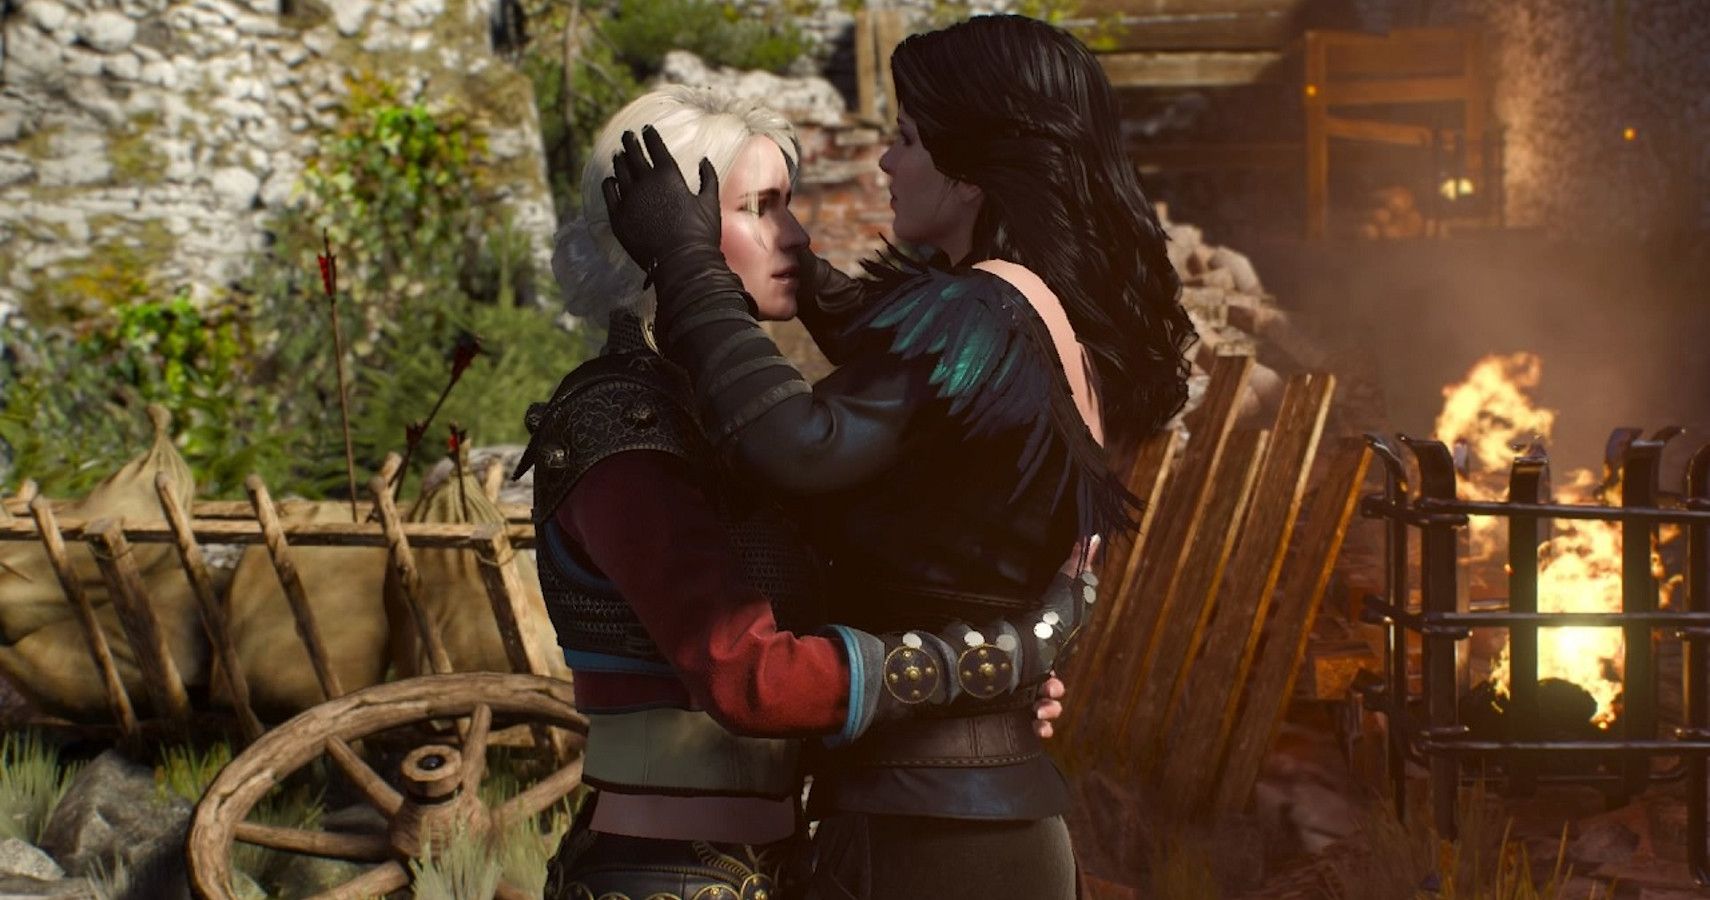 yennefer and ciri embracing one another